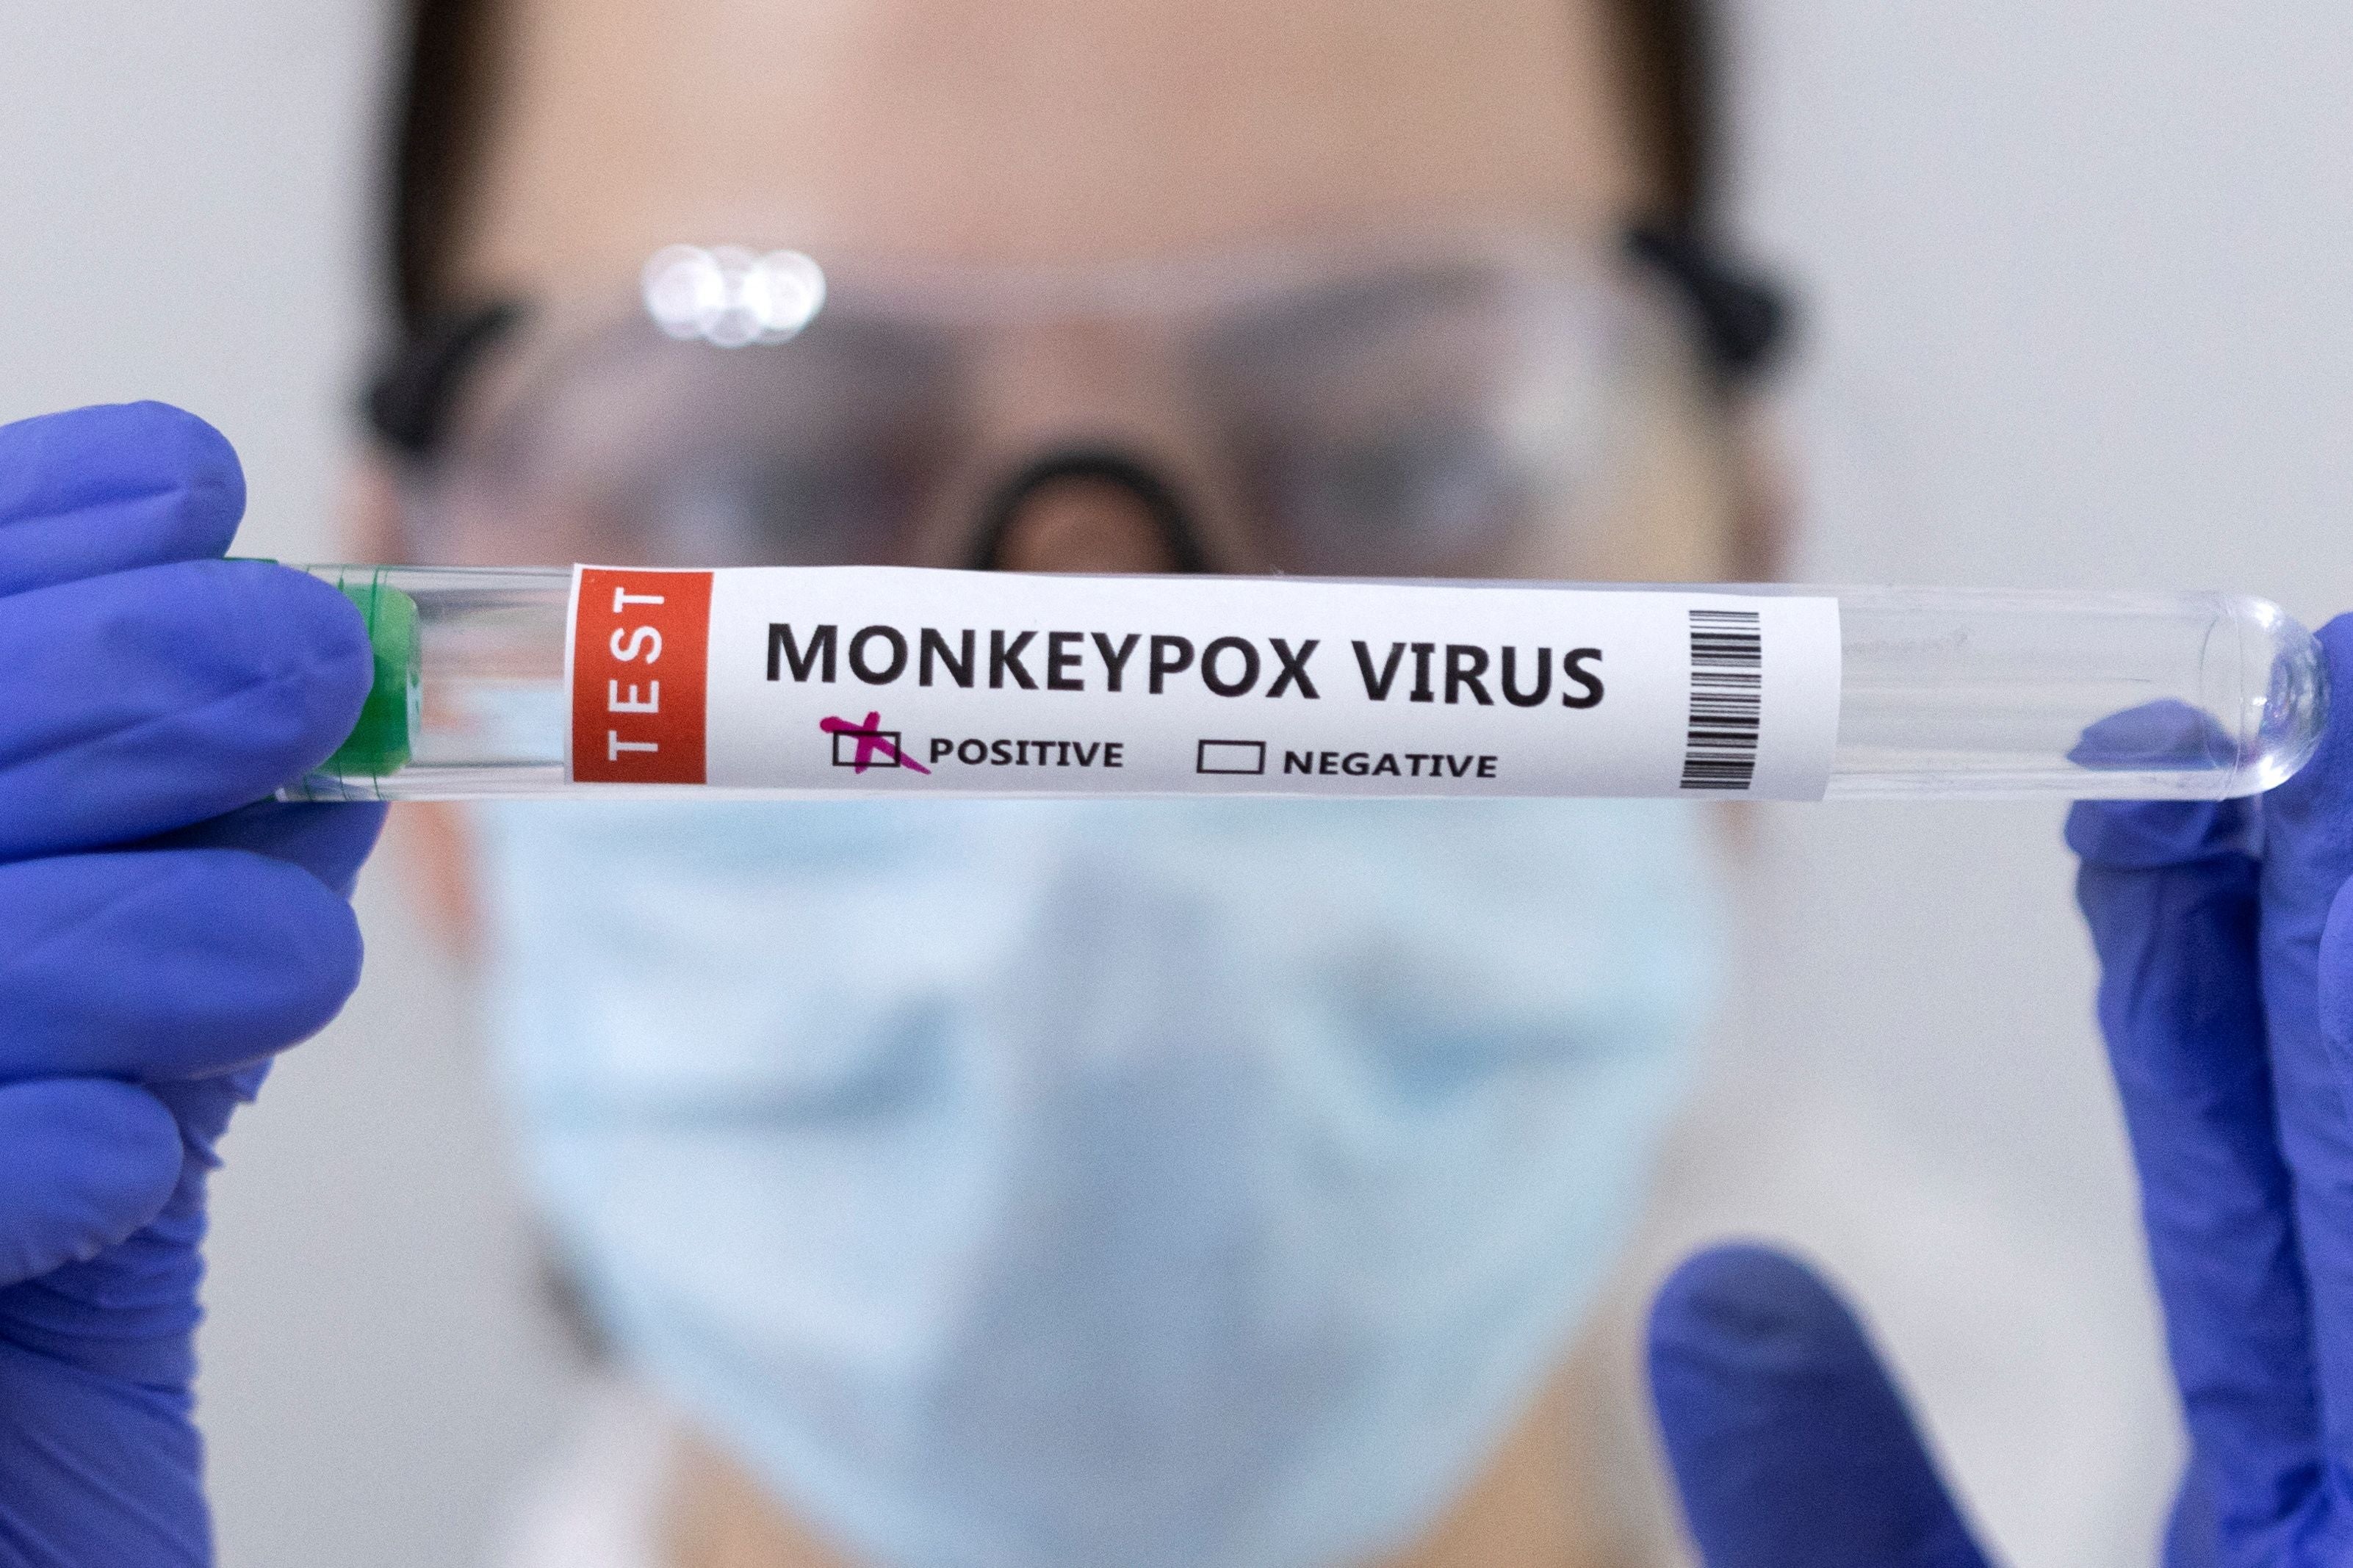 Test tubes labelled ‘Monkeypox virus positive’ are seen in this illustration